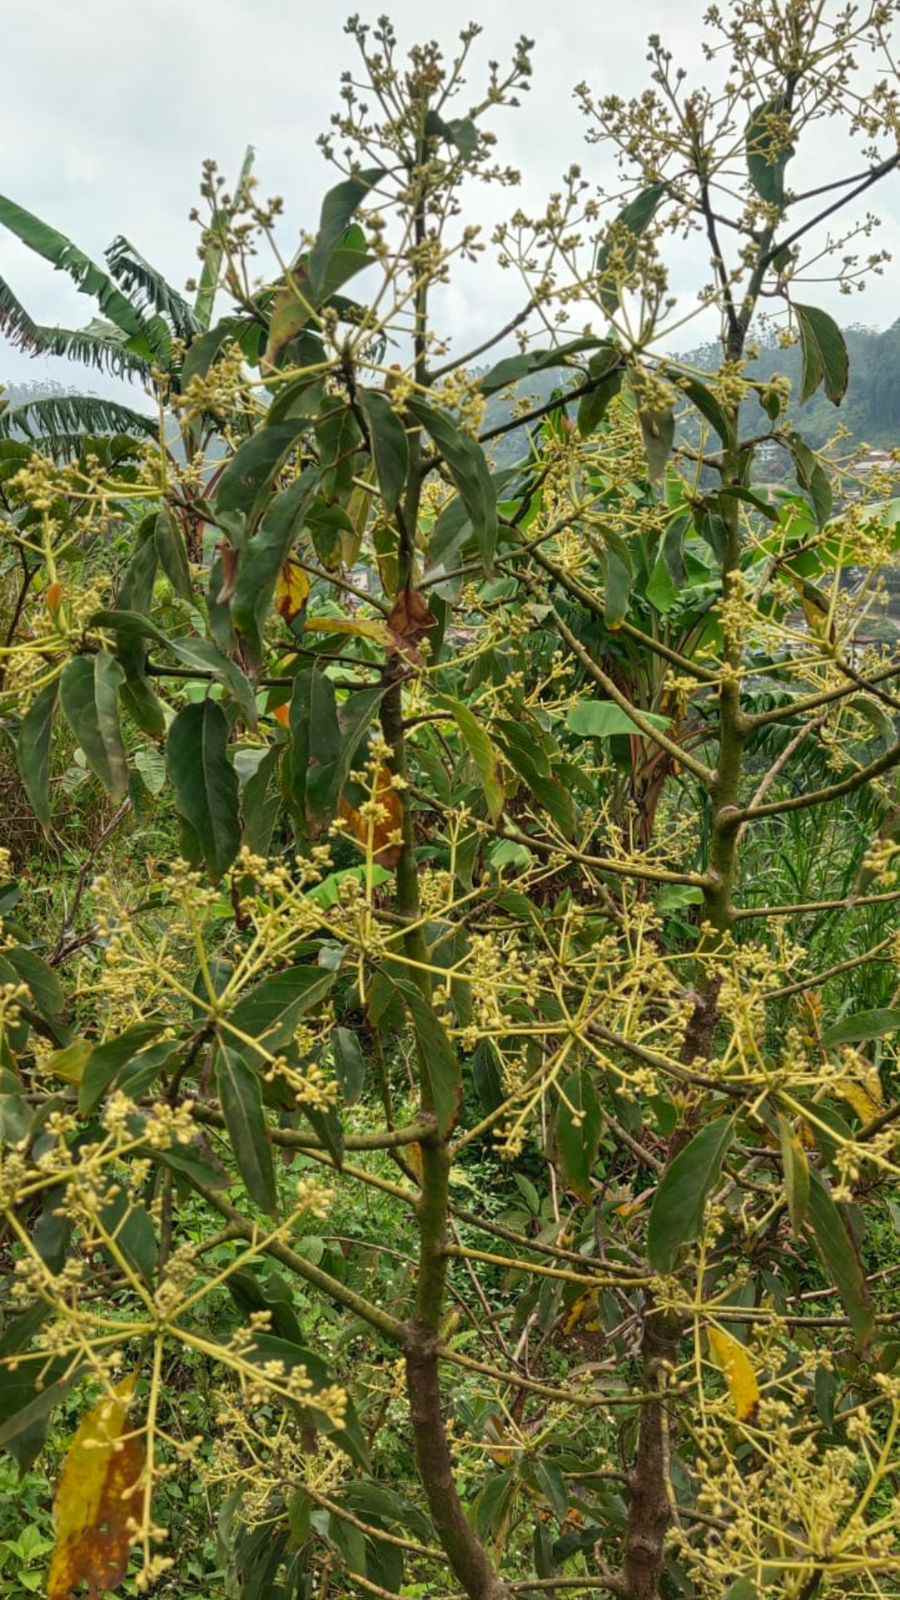 Avacado flowering in the food forest that George Manu has created